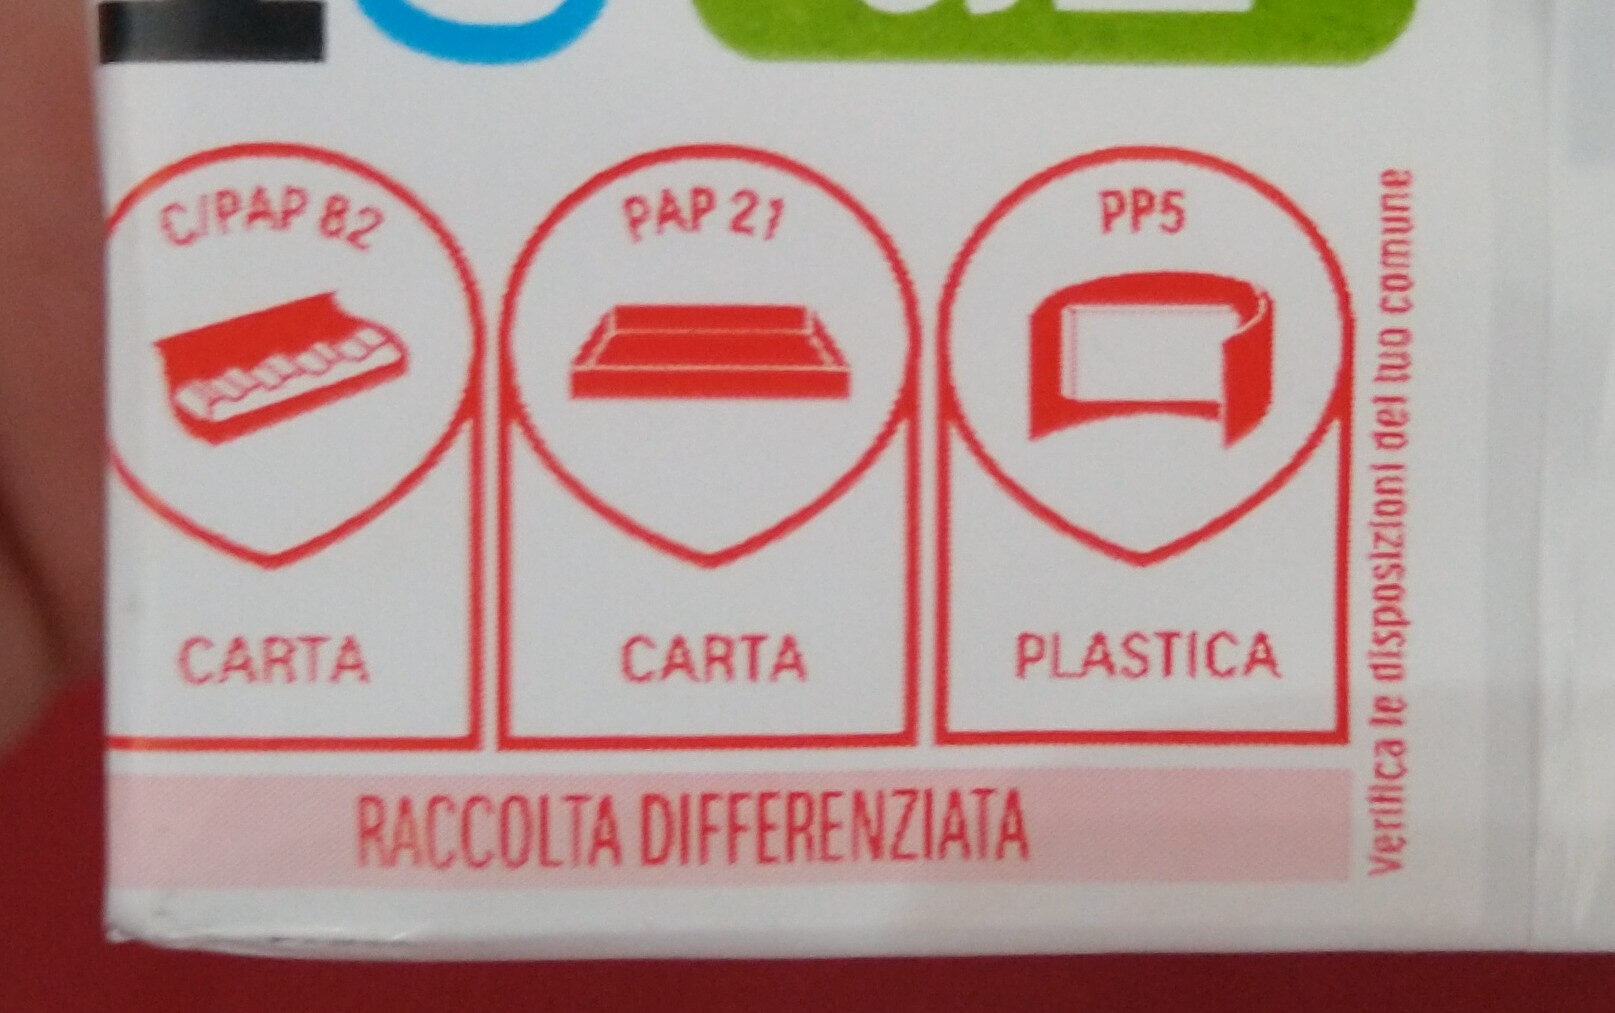 Kinder Choccolato - Recycling instructions and/or packaging information - it